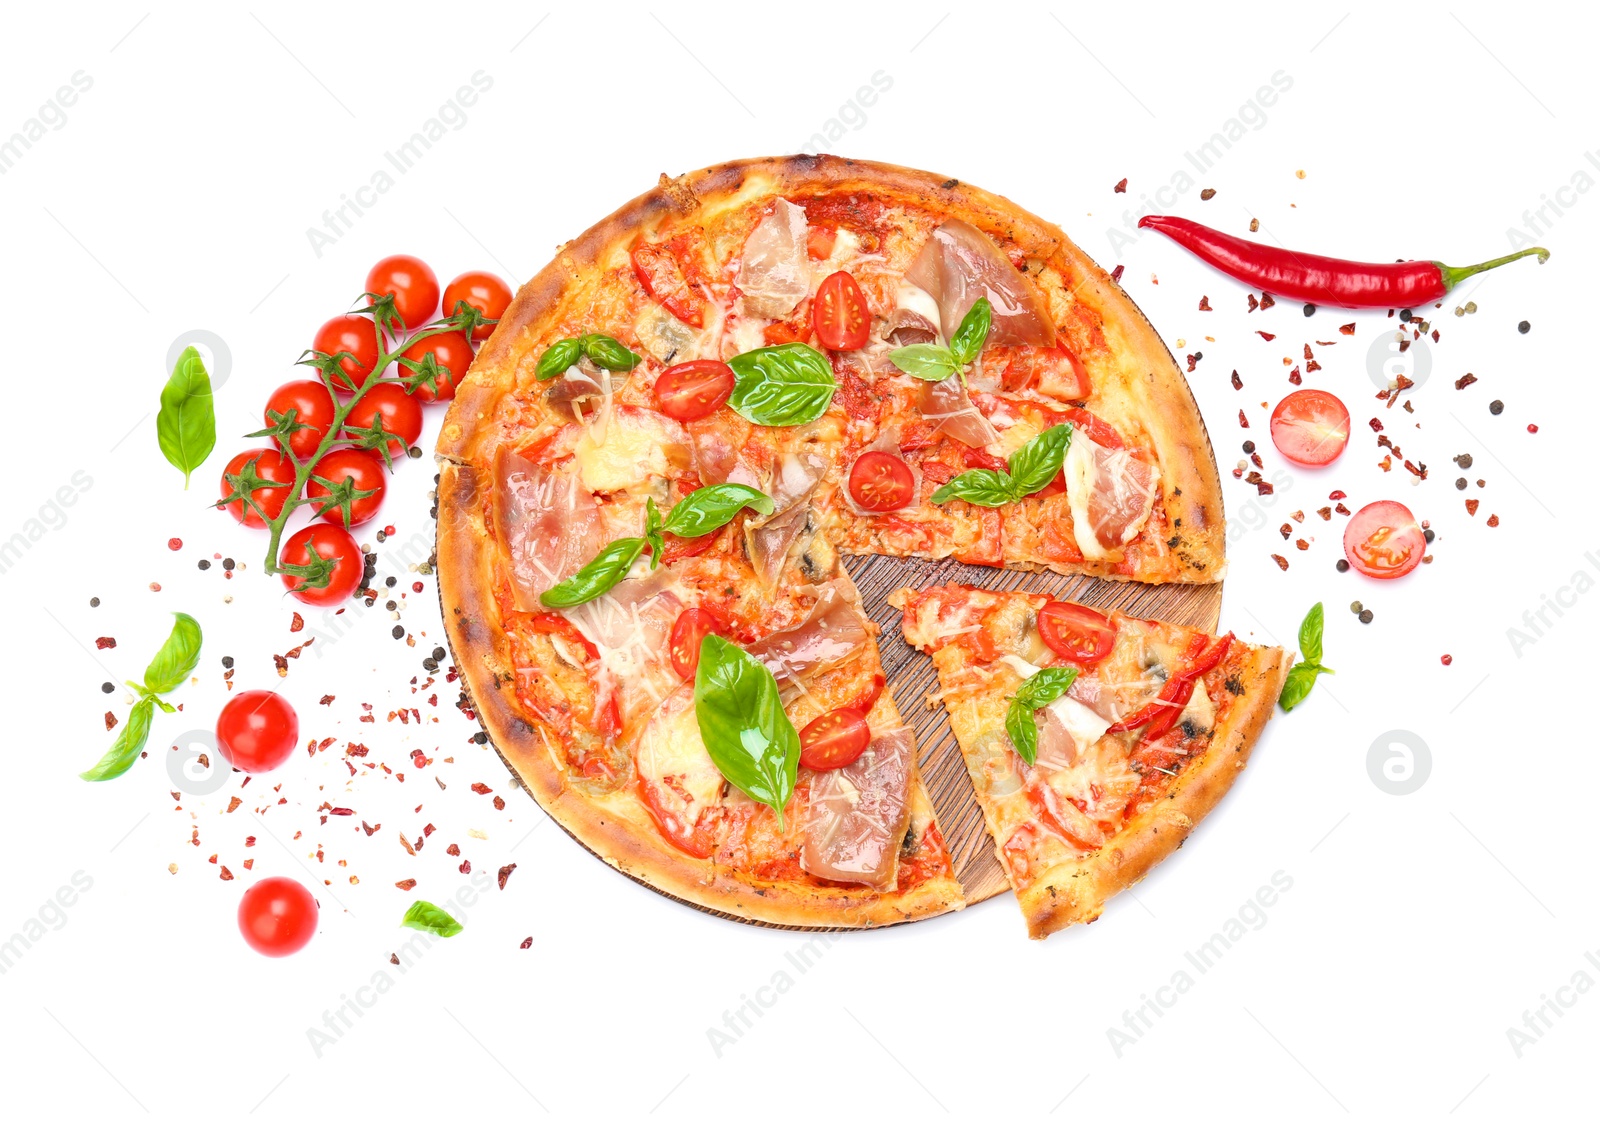 Photo of Delicious pizza with tomatoes and meat on white background